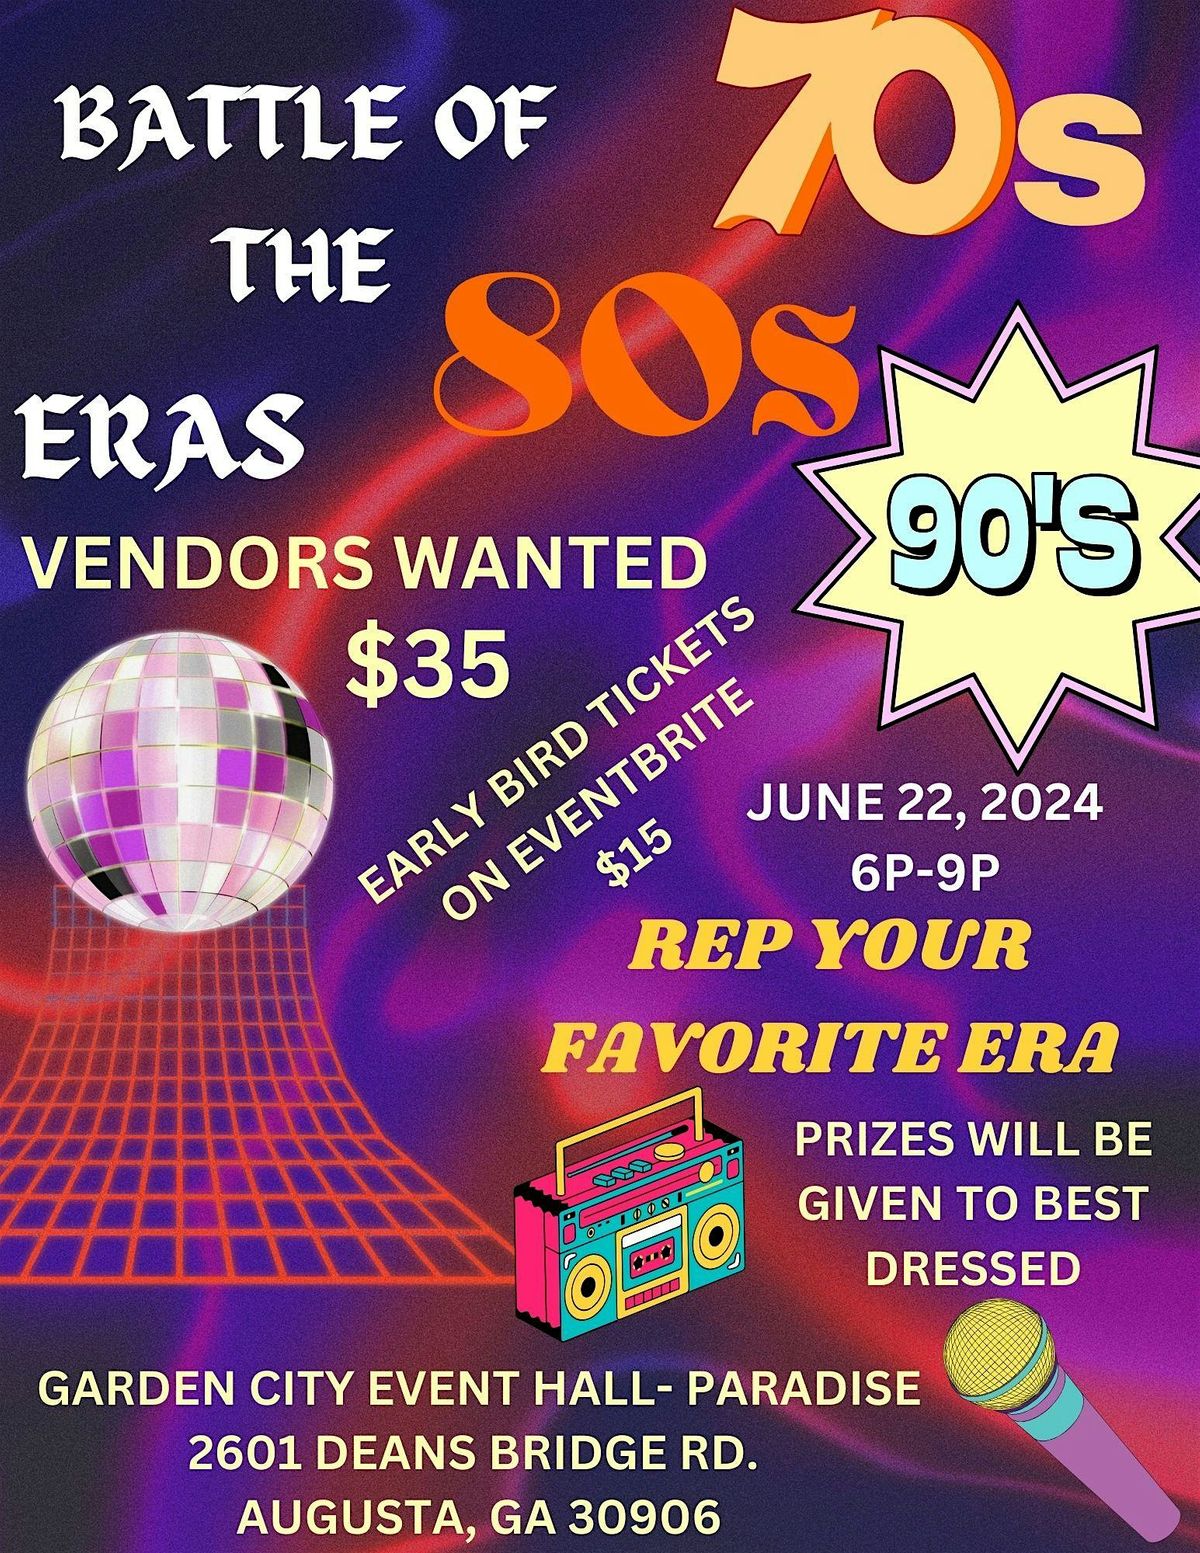 BATTLE OF THE 70s, 80s, and 90s ERA- REP YOUR FAVORITE ERA